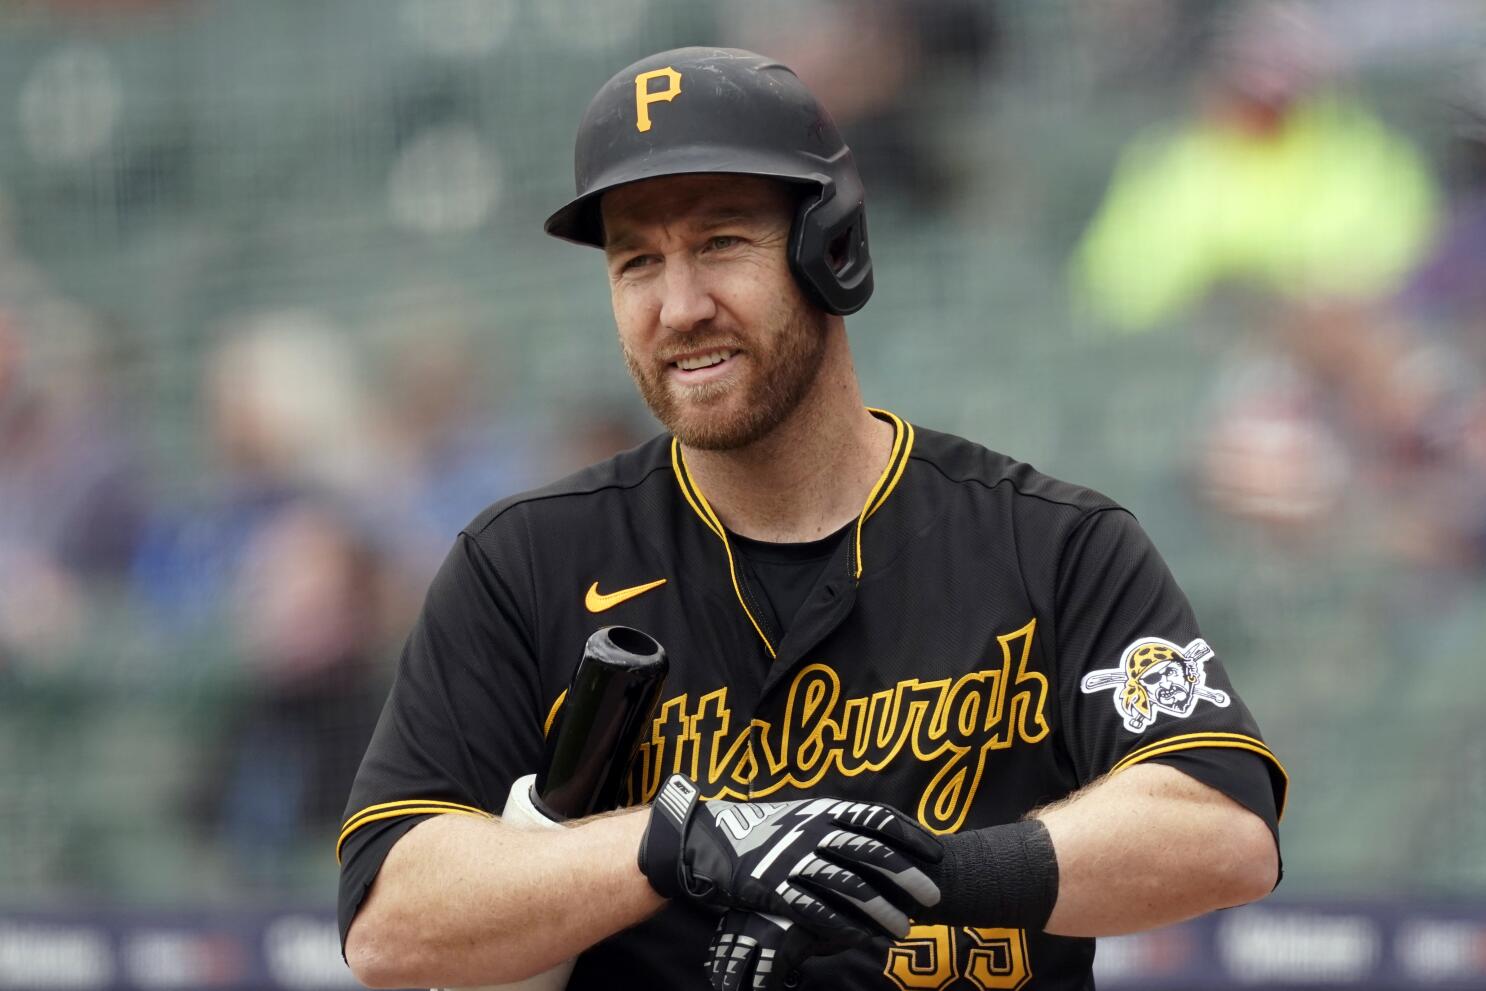 Todd Frazier reminisces about the Little League World Series on